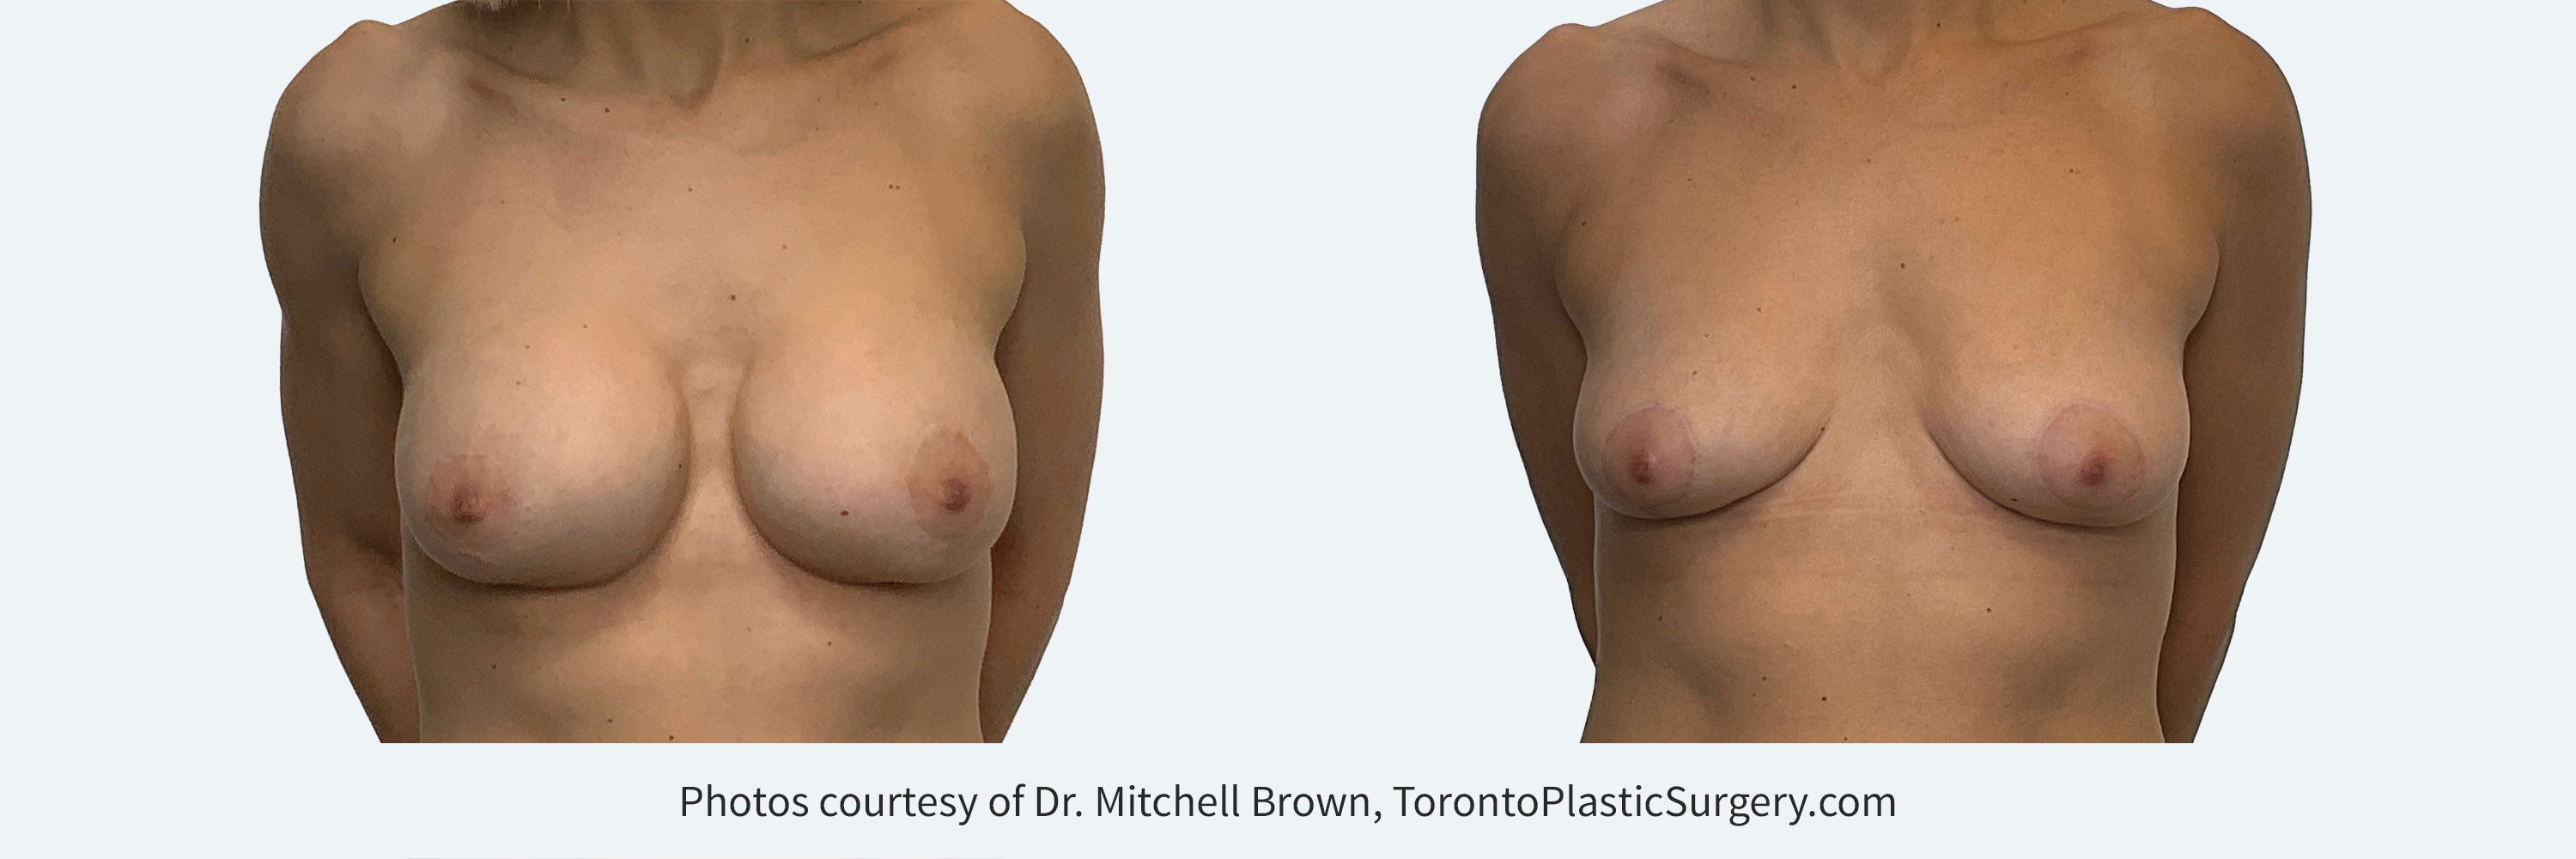 Implants for 9 years and desires removal with breast lift and fat grafting, before and 6 months after